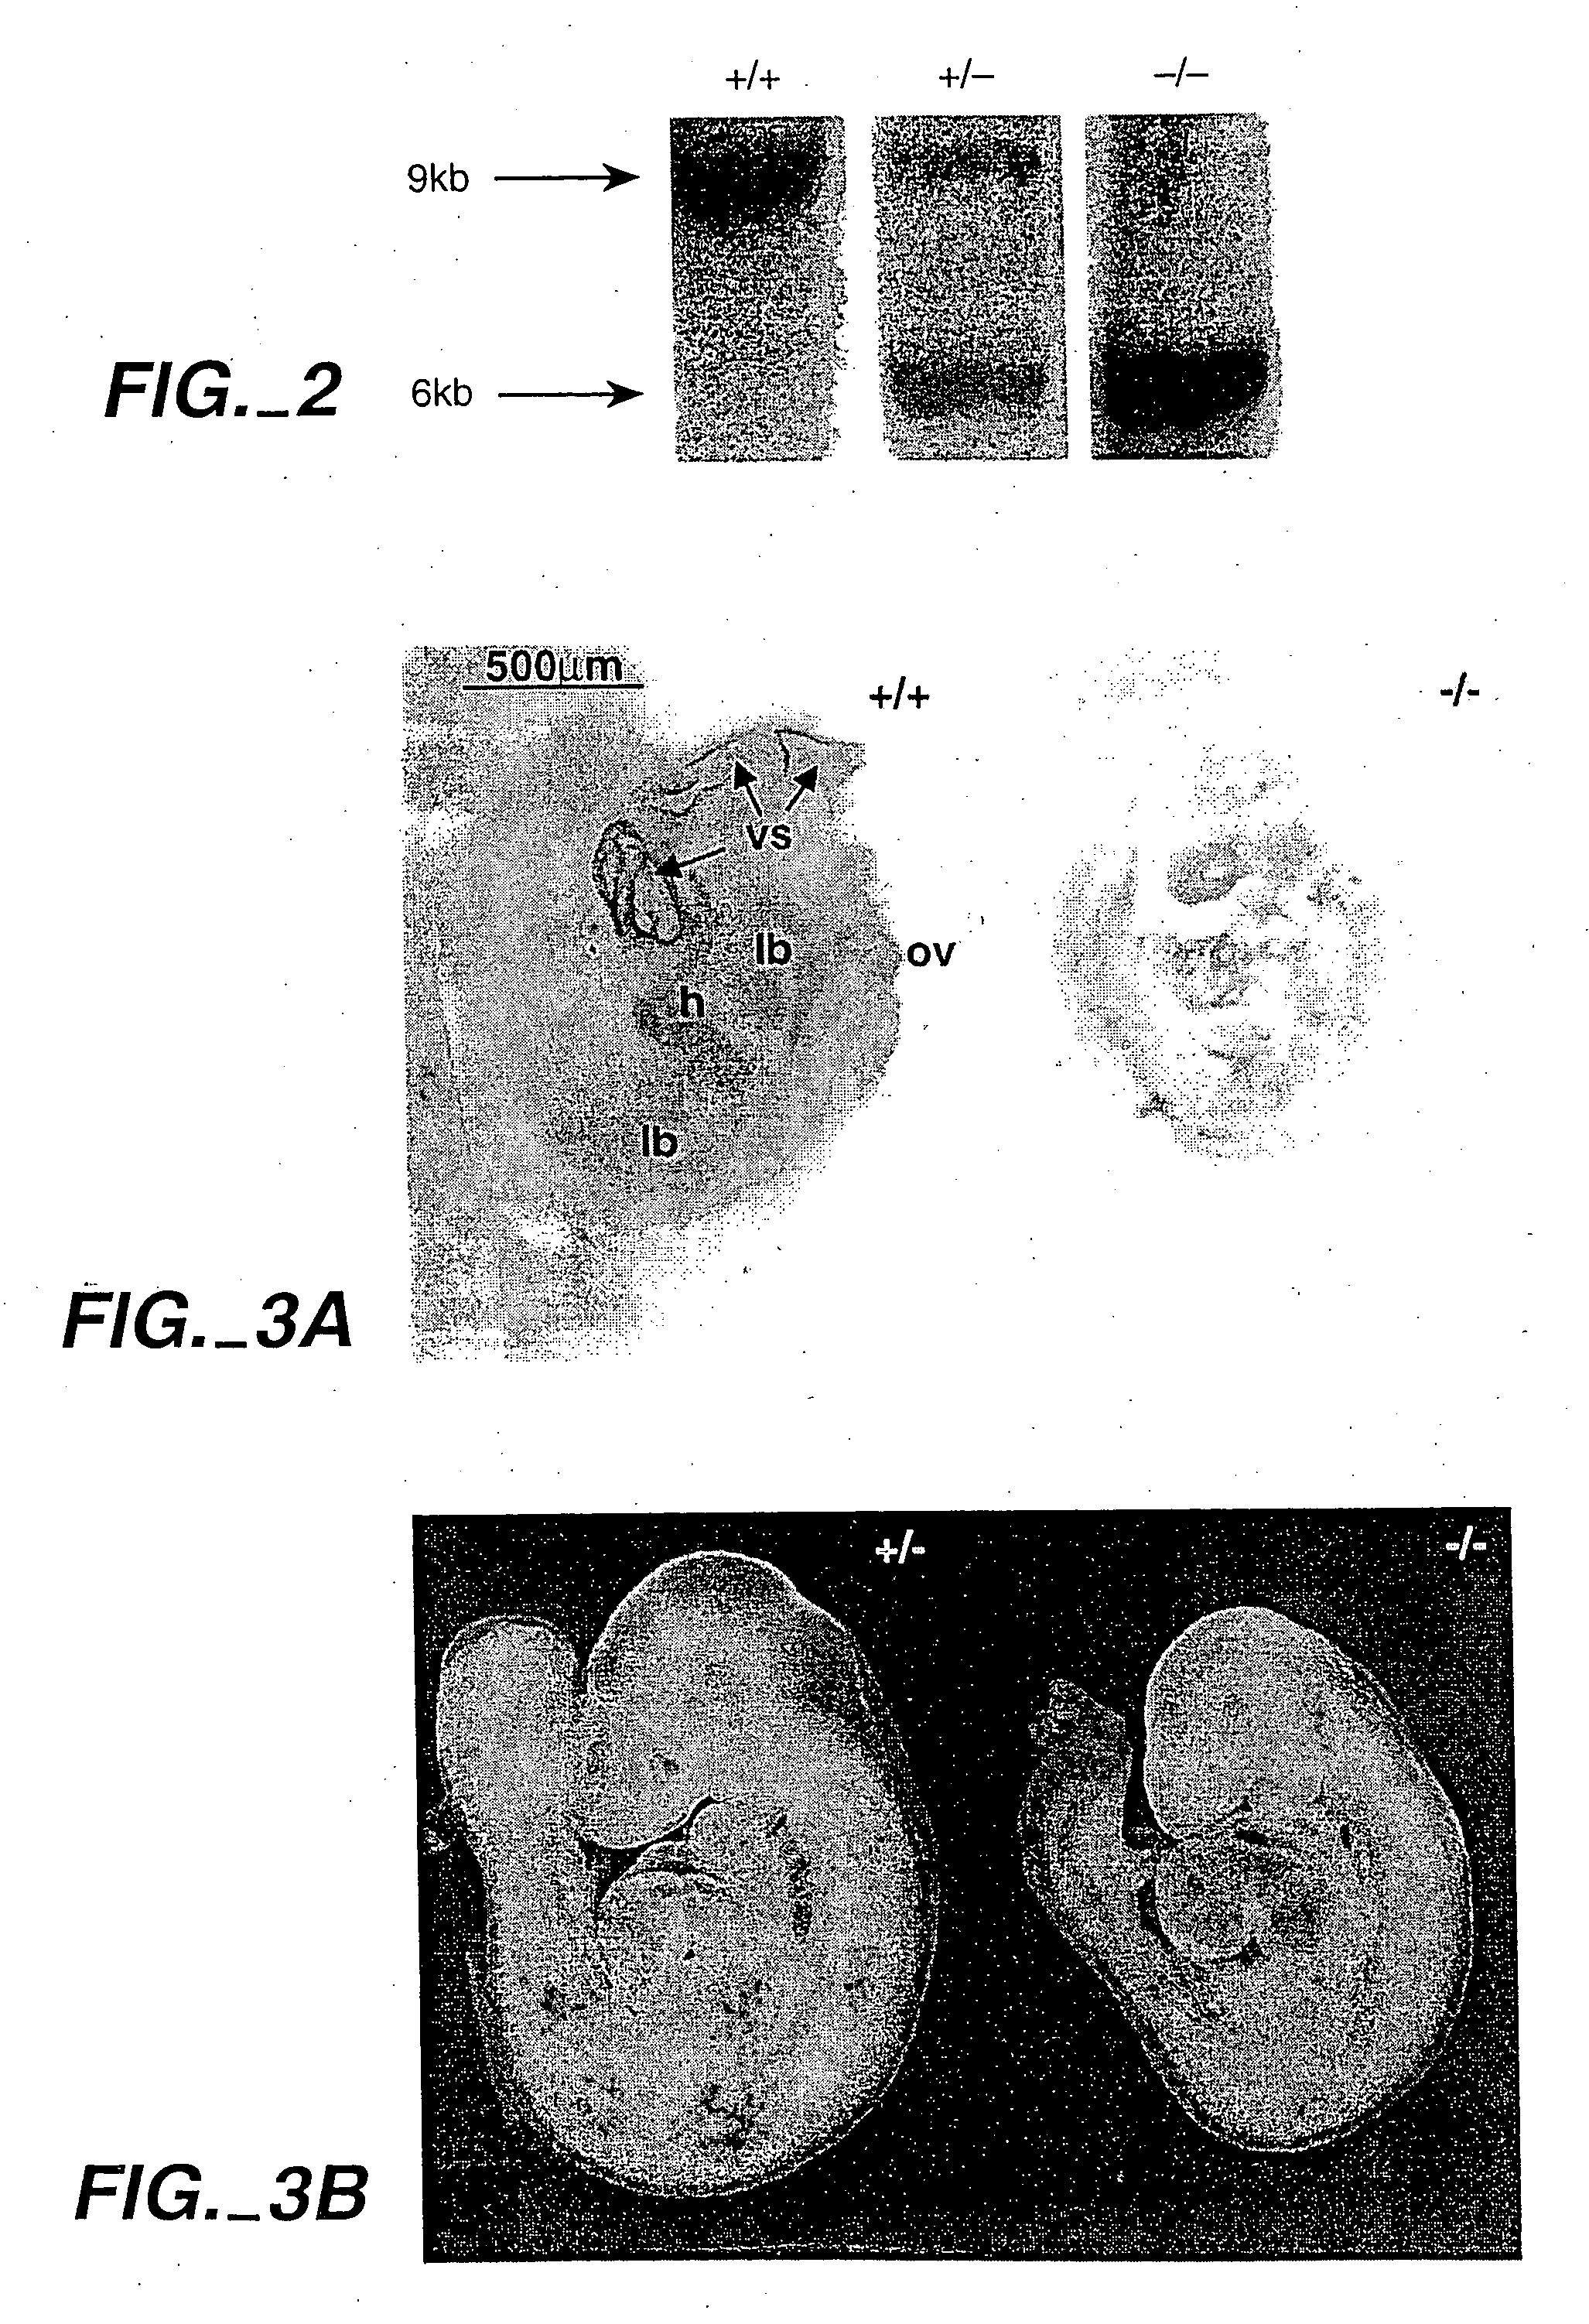 Methods for inhibiting angiogenesis by EphB receptor antagonists